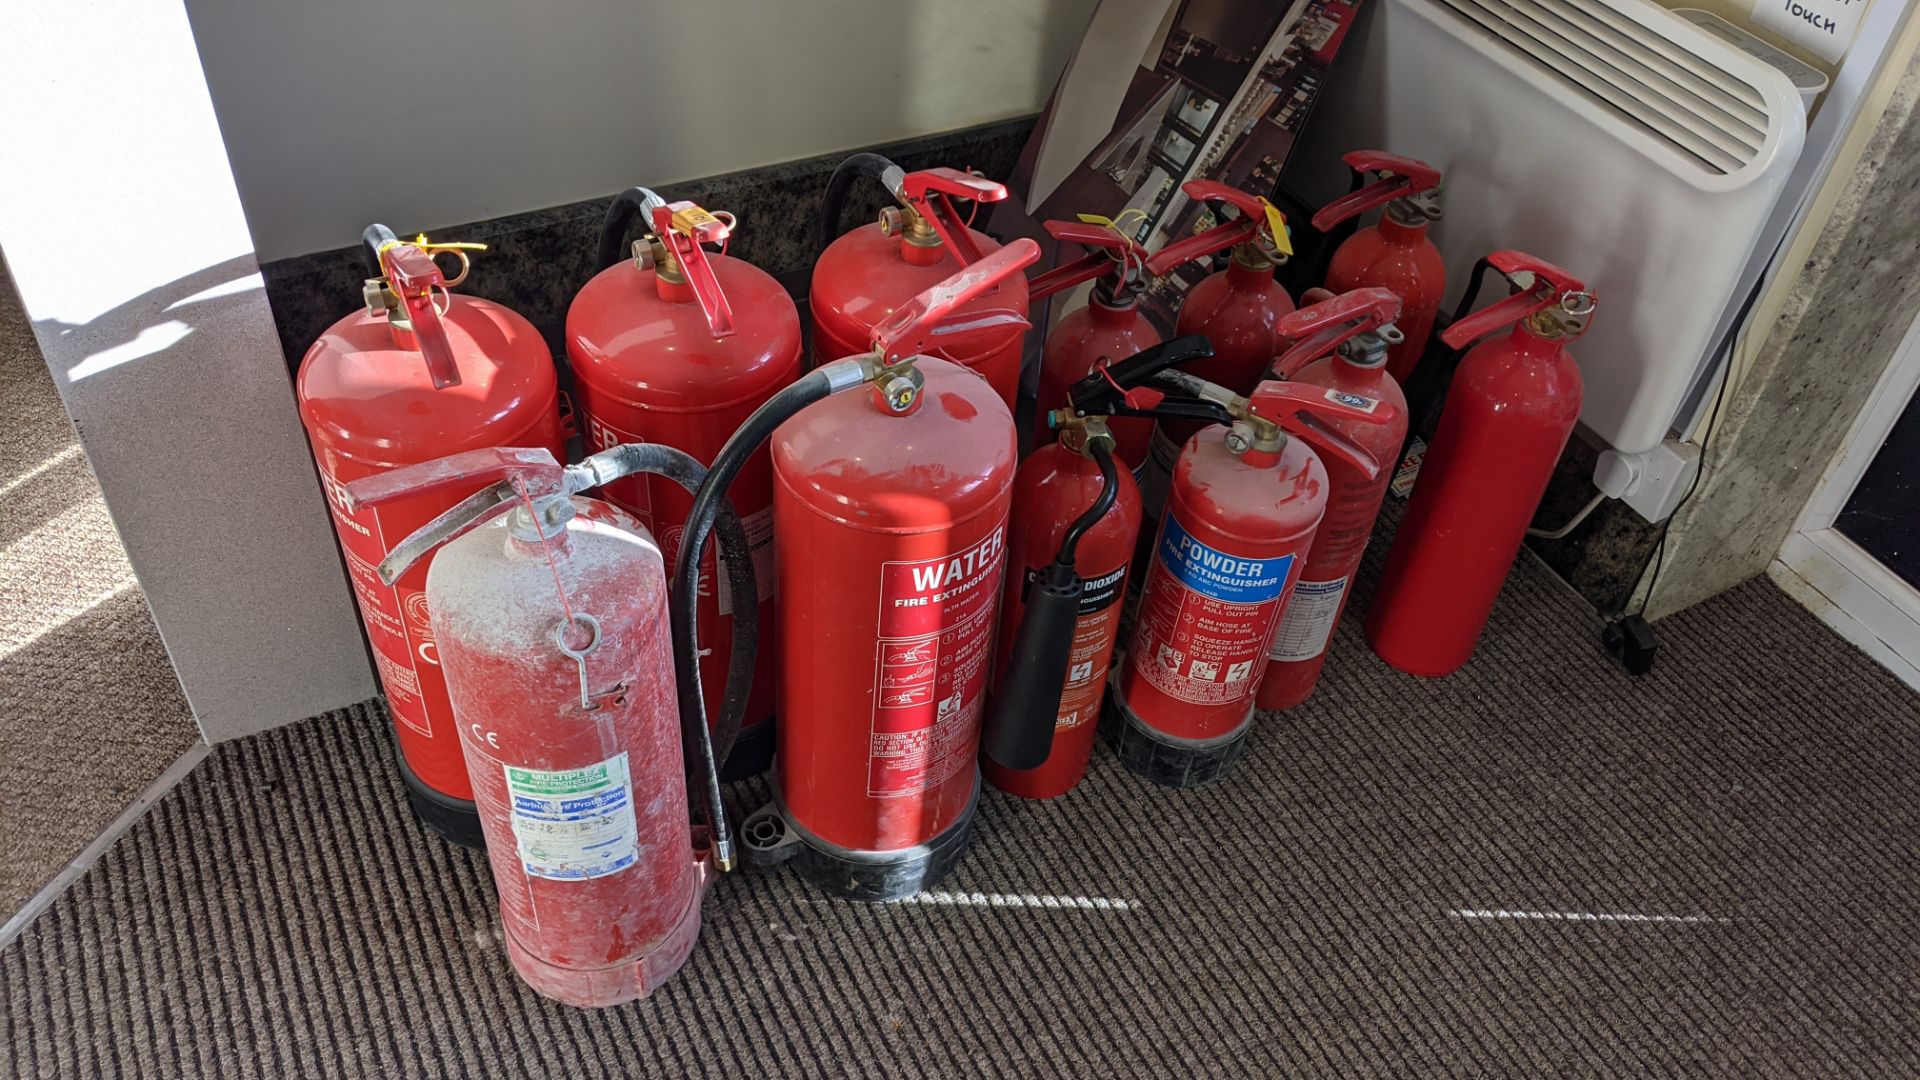 Approx. 12 fire extinguishers